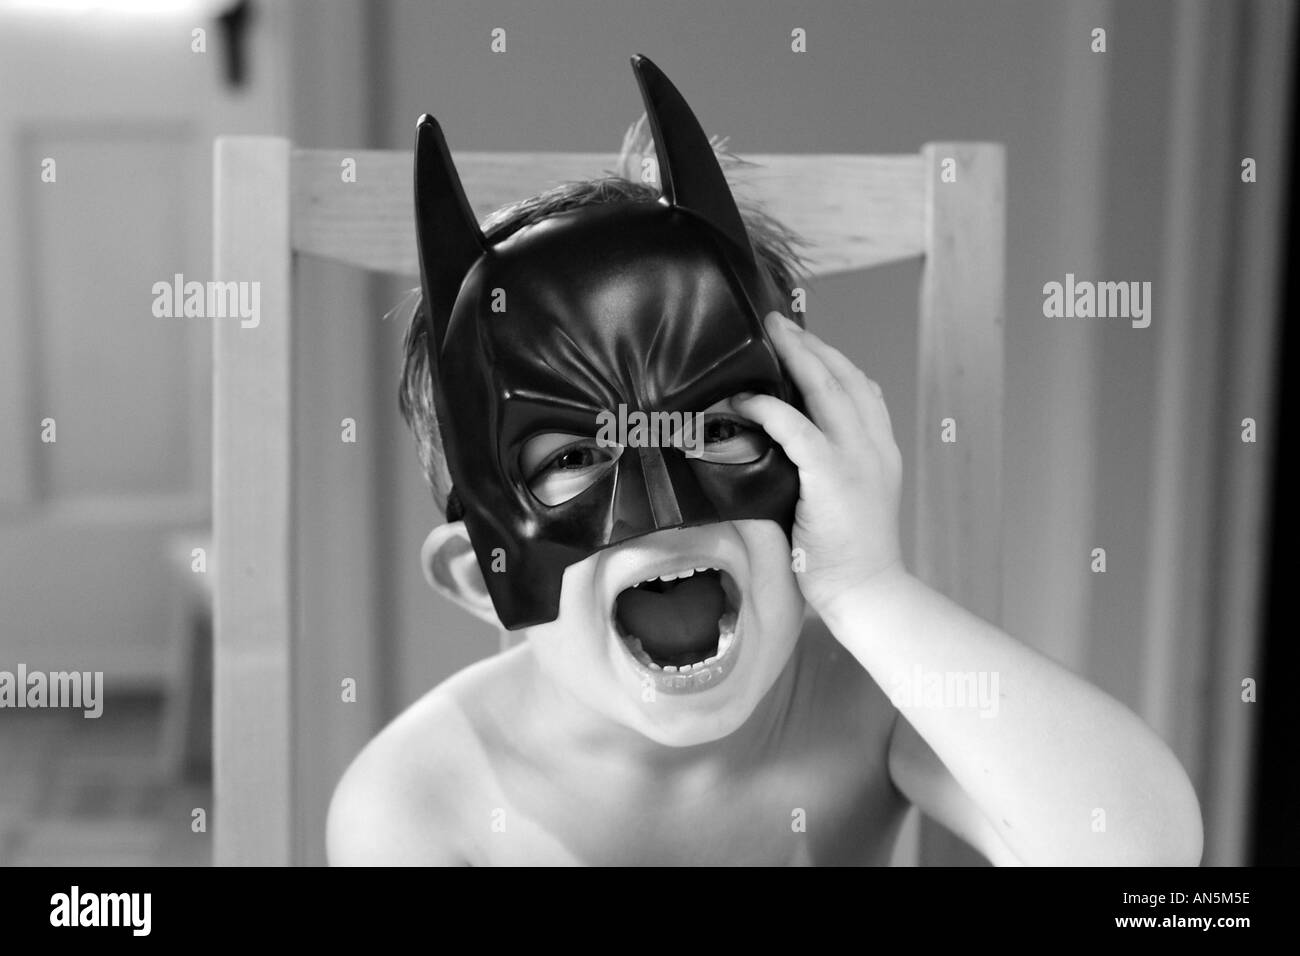 Child with Mask on Halloween mask Stock Photo